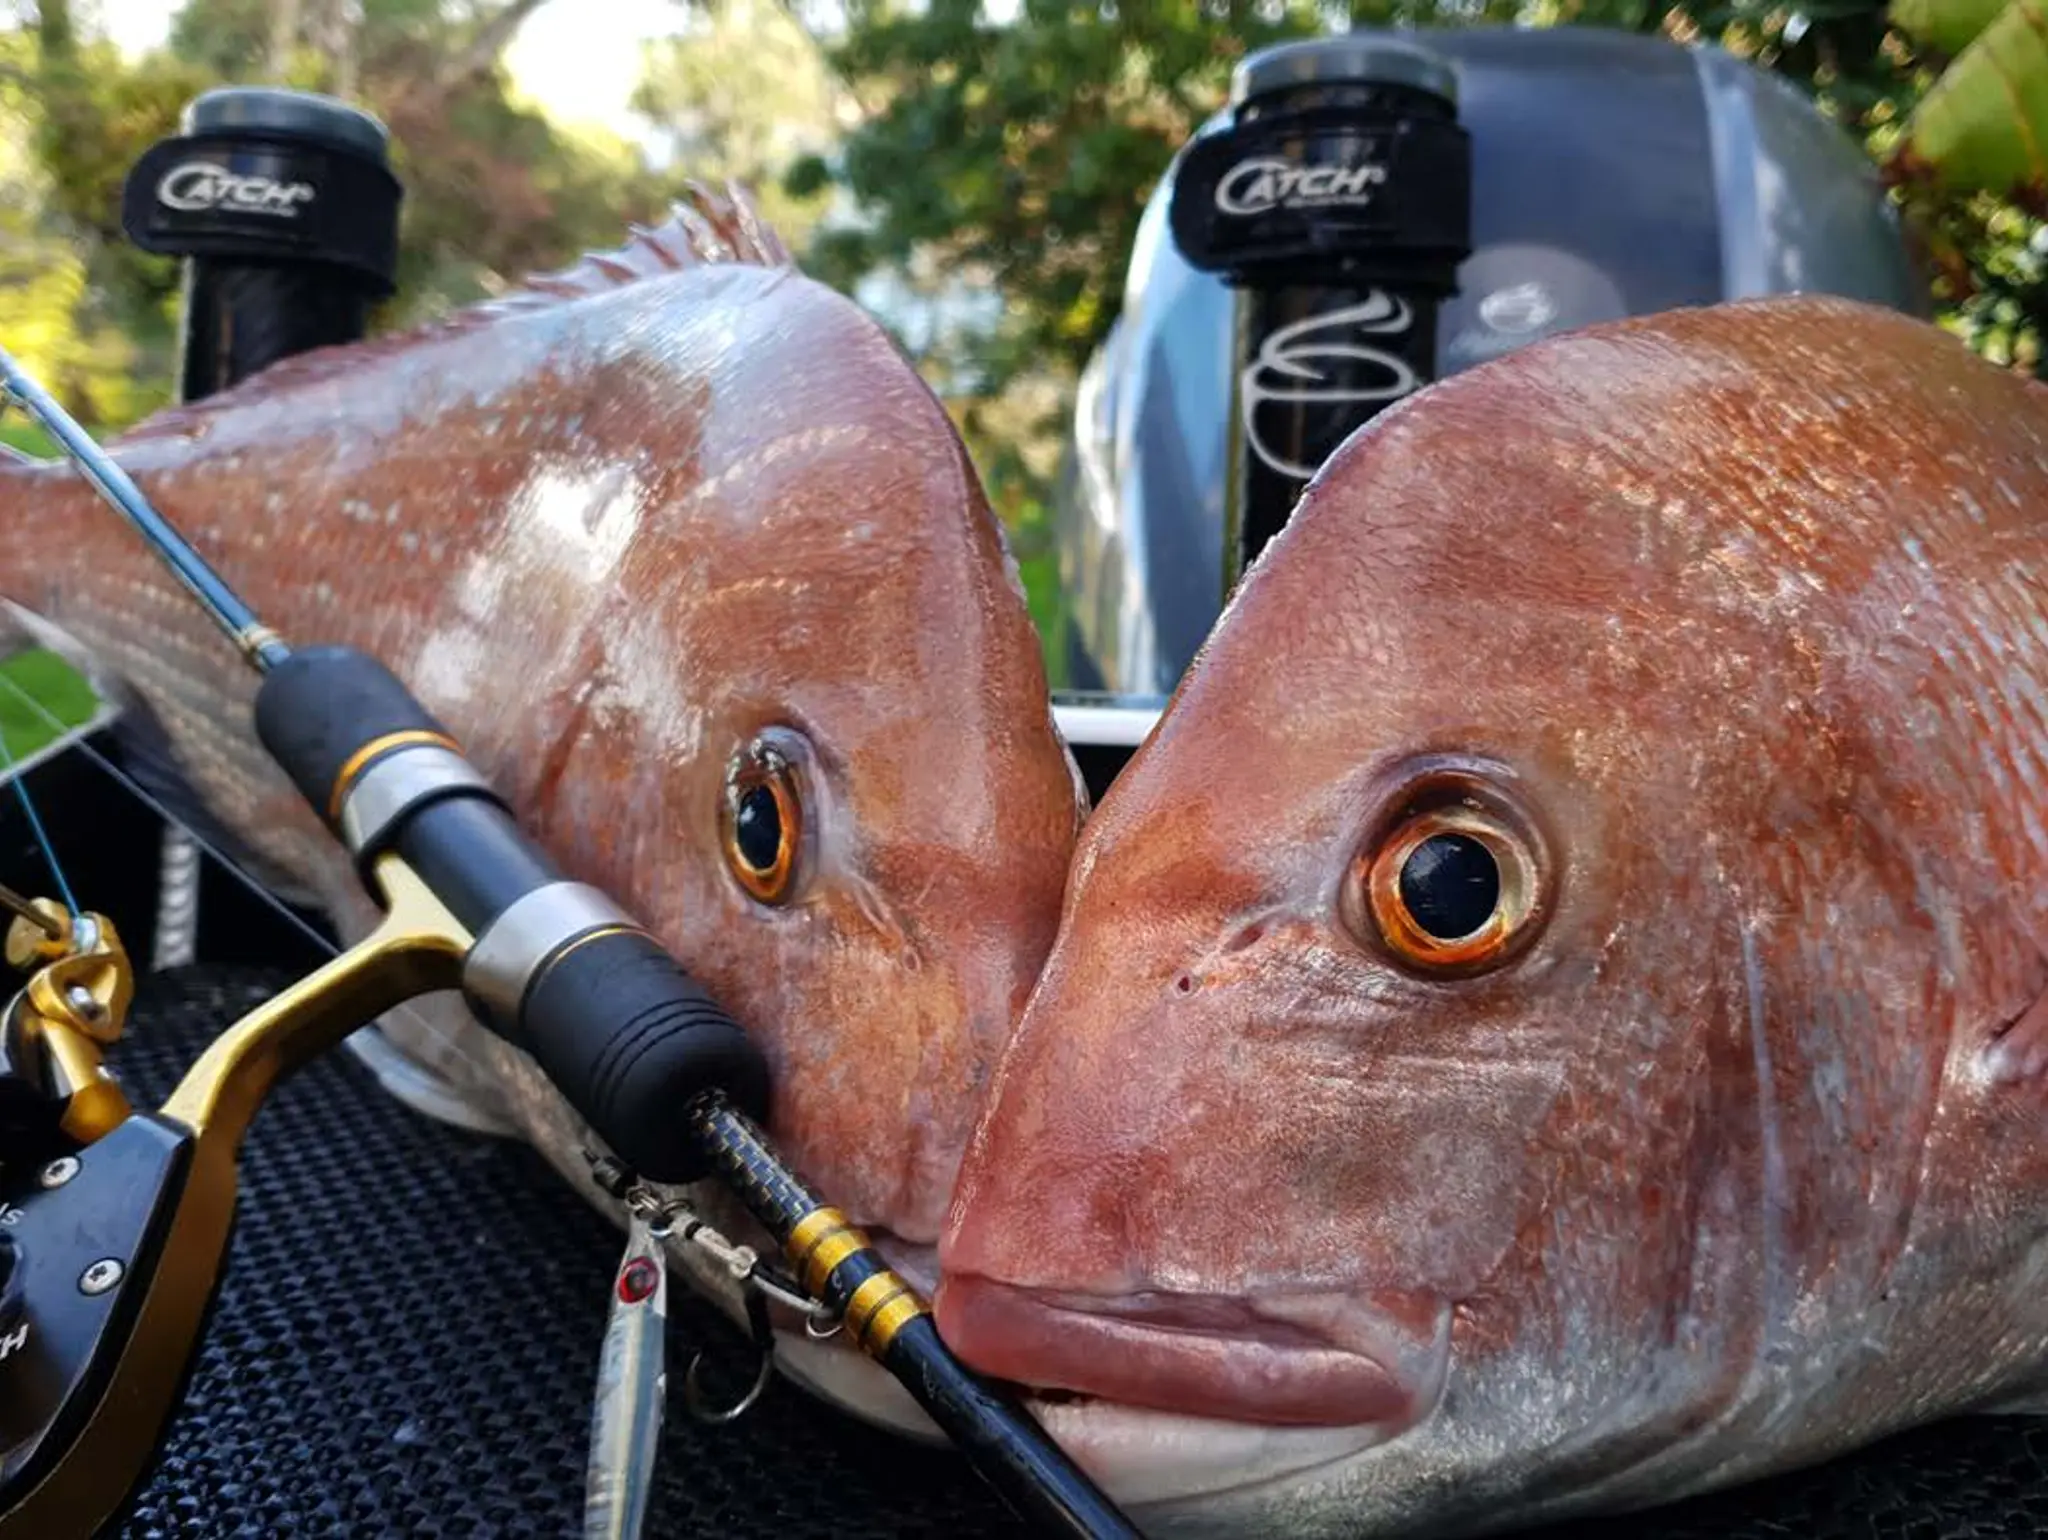 DOES LEADER WEIGHT REALLY MATTER FOR SNAPPER?